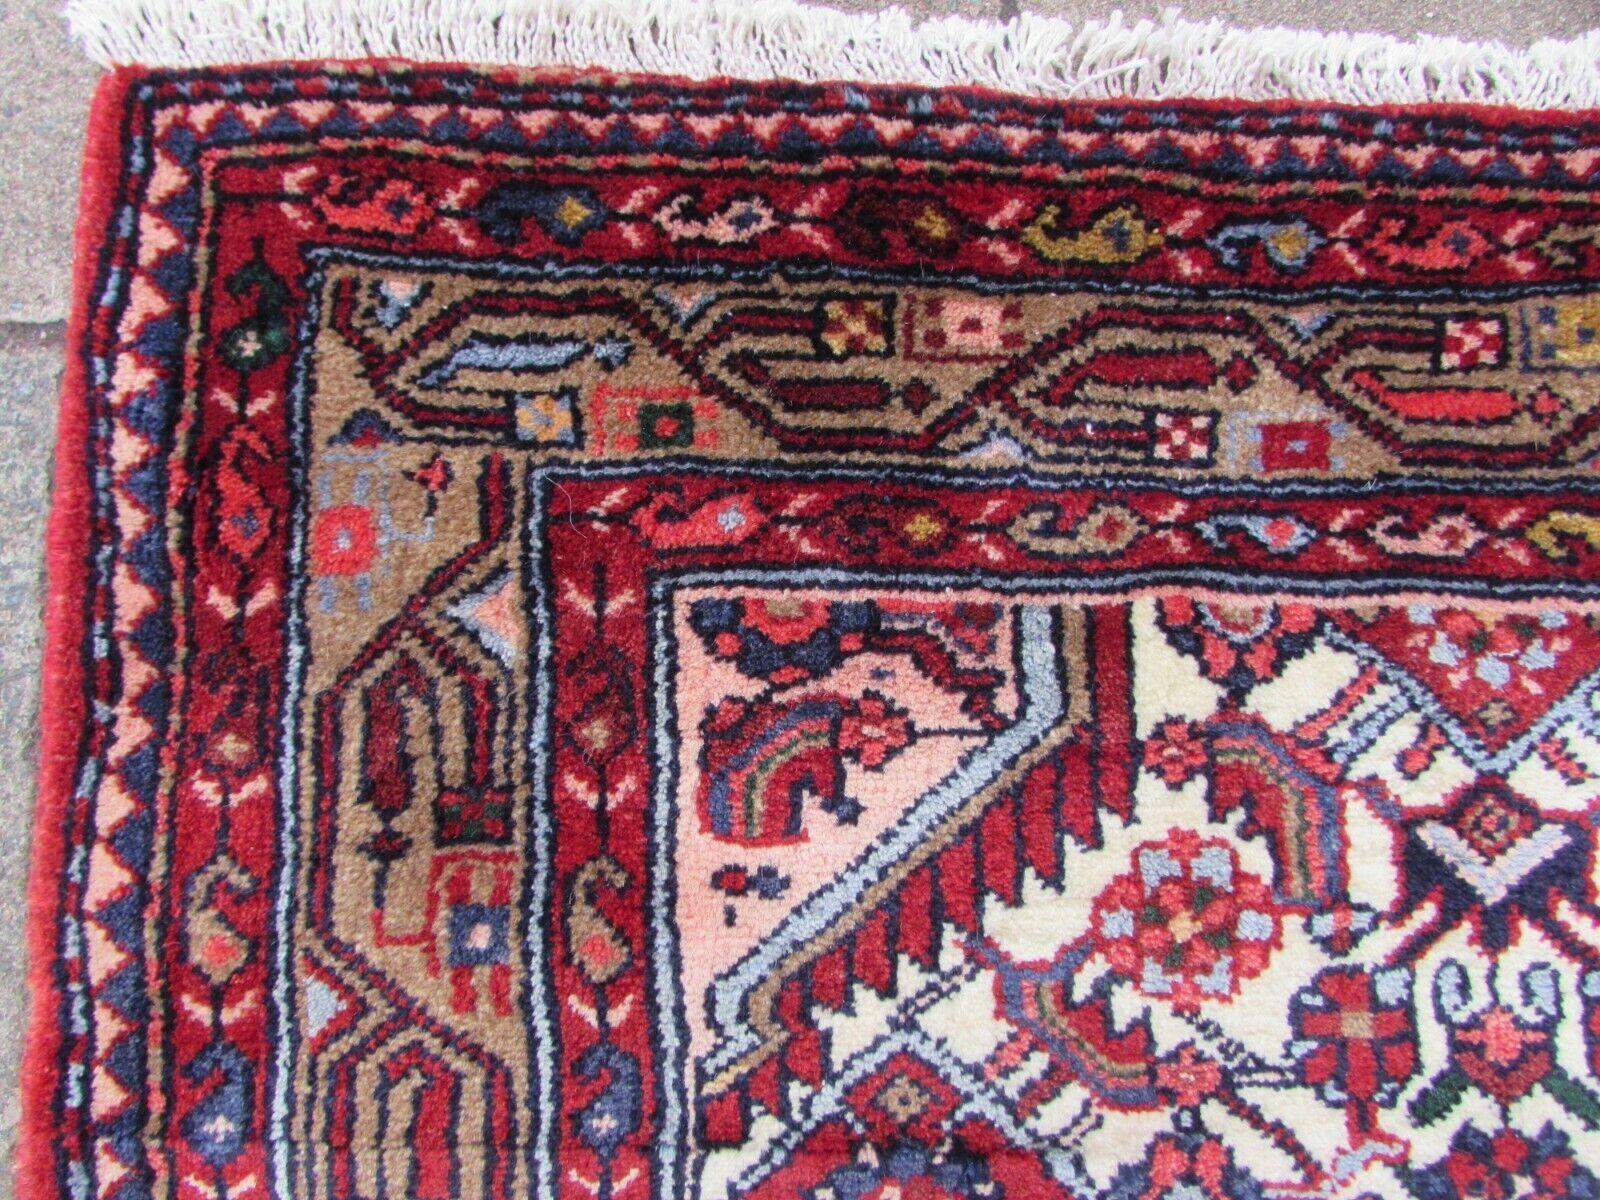 Handmade Vintage Persian Style Hamadan Long Runner Rug 2.8' x 18.8', 1970s, 1Q47 In Good Condition For Sale In Bordeaux, FR